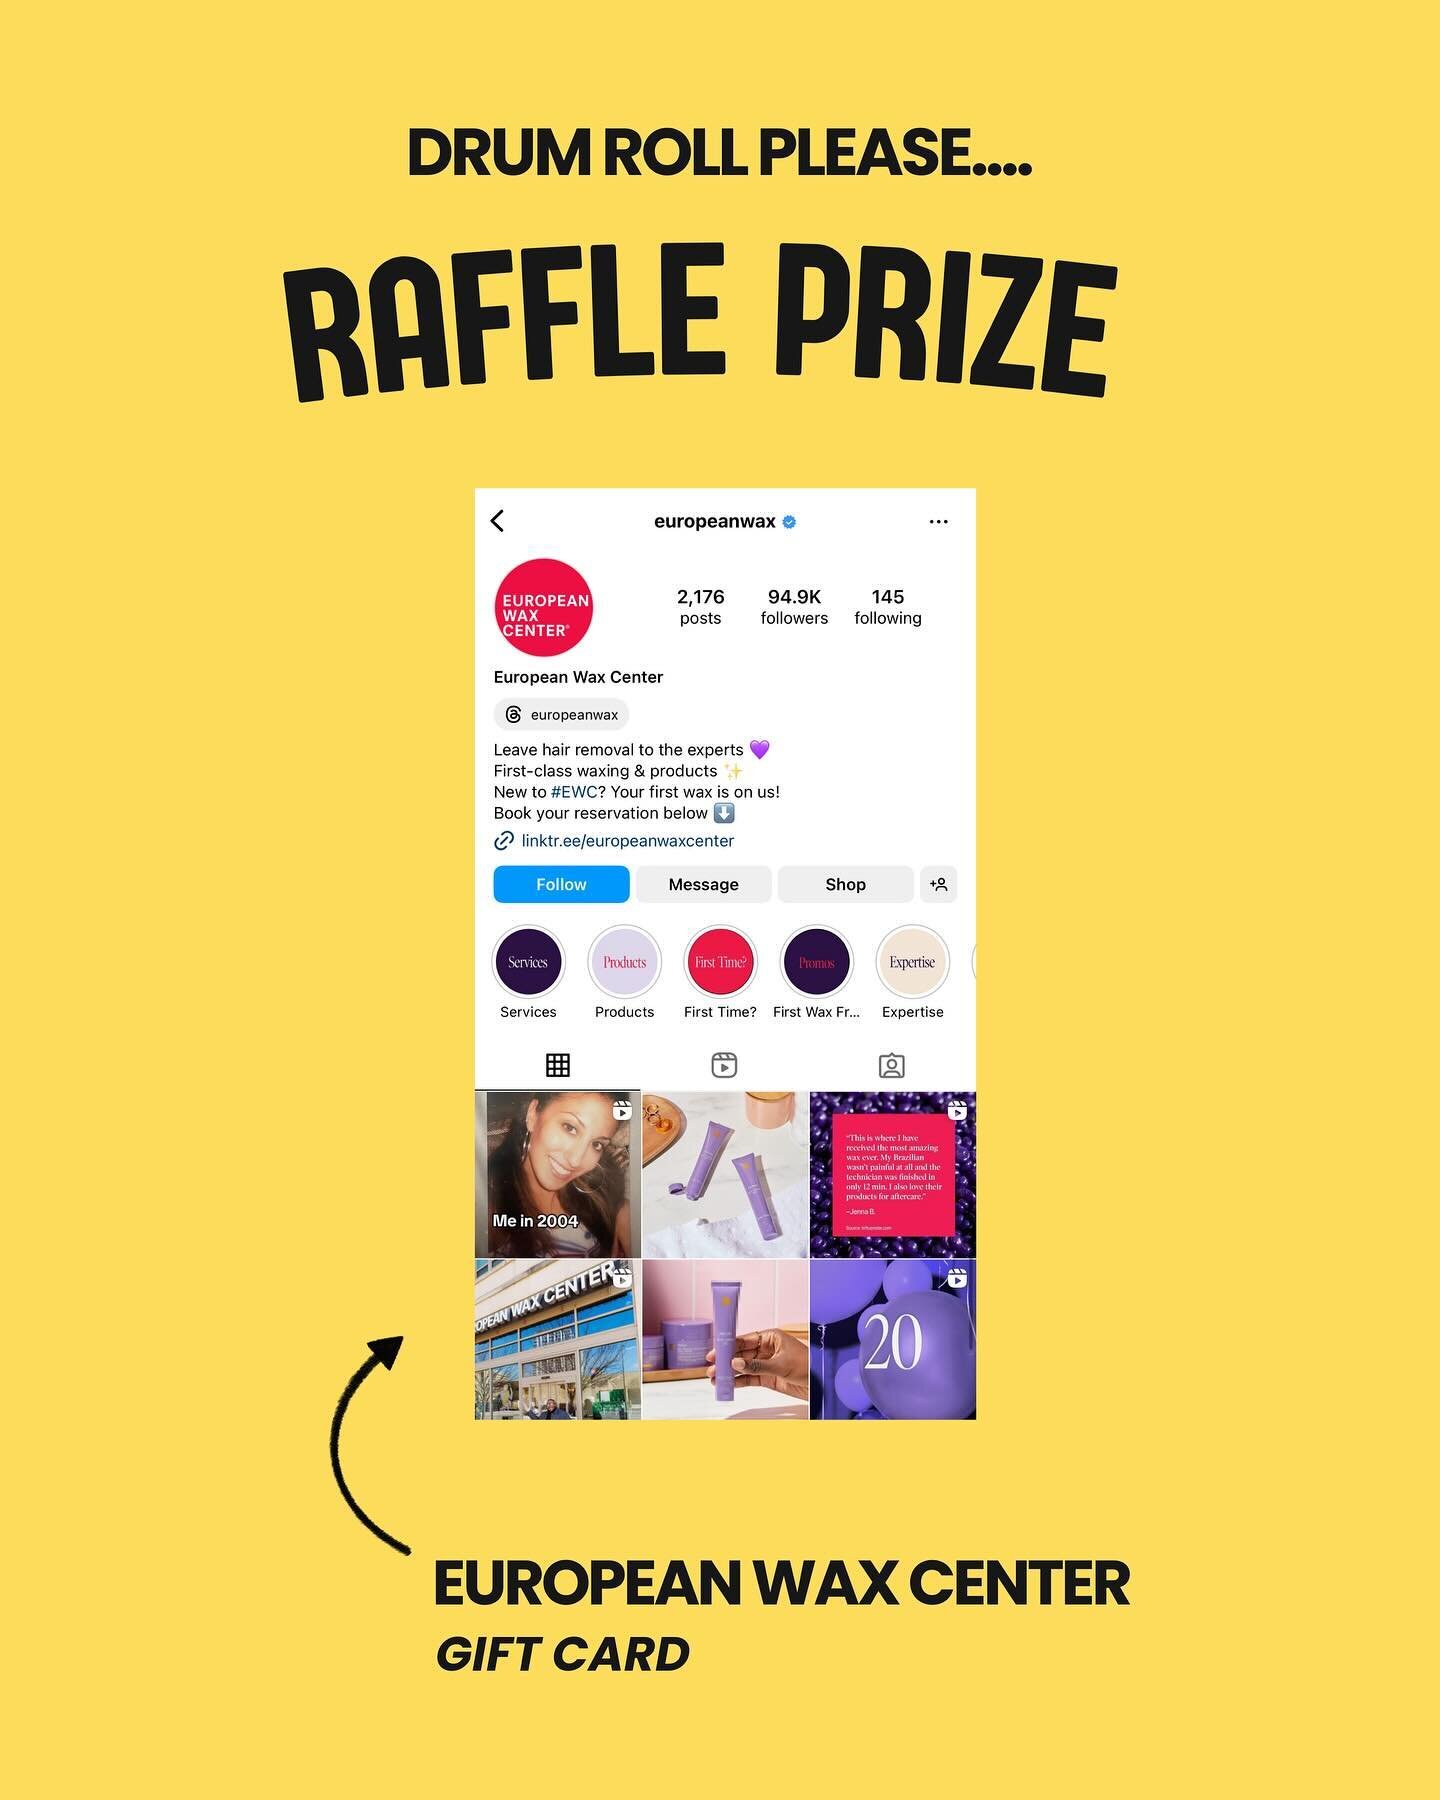 Last day of Raffle prize announcements. Looking forward to seeing everyone at the event. 🎉

Huge thank you to @EuropeanWax 💛 The world&rsquo;s largest waxing center! They provide exceptional waxing services and make us feel confident and fabulous! 